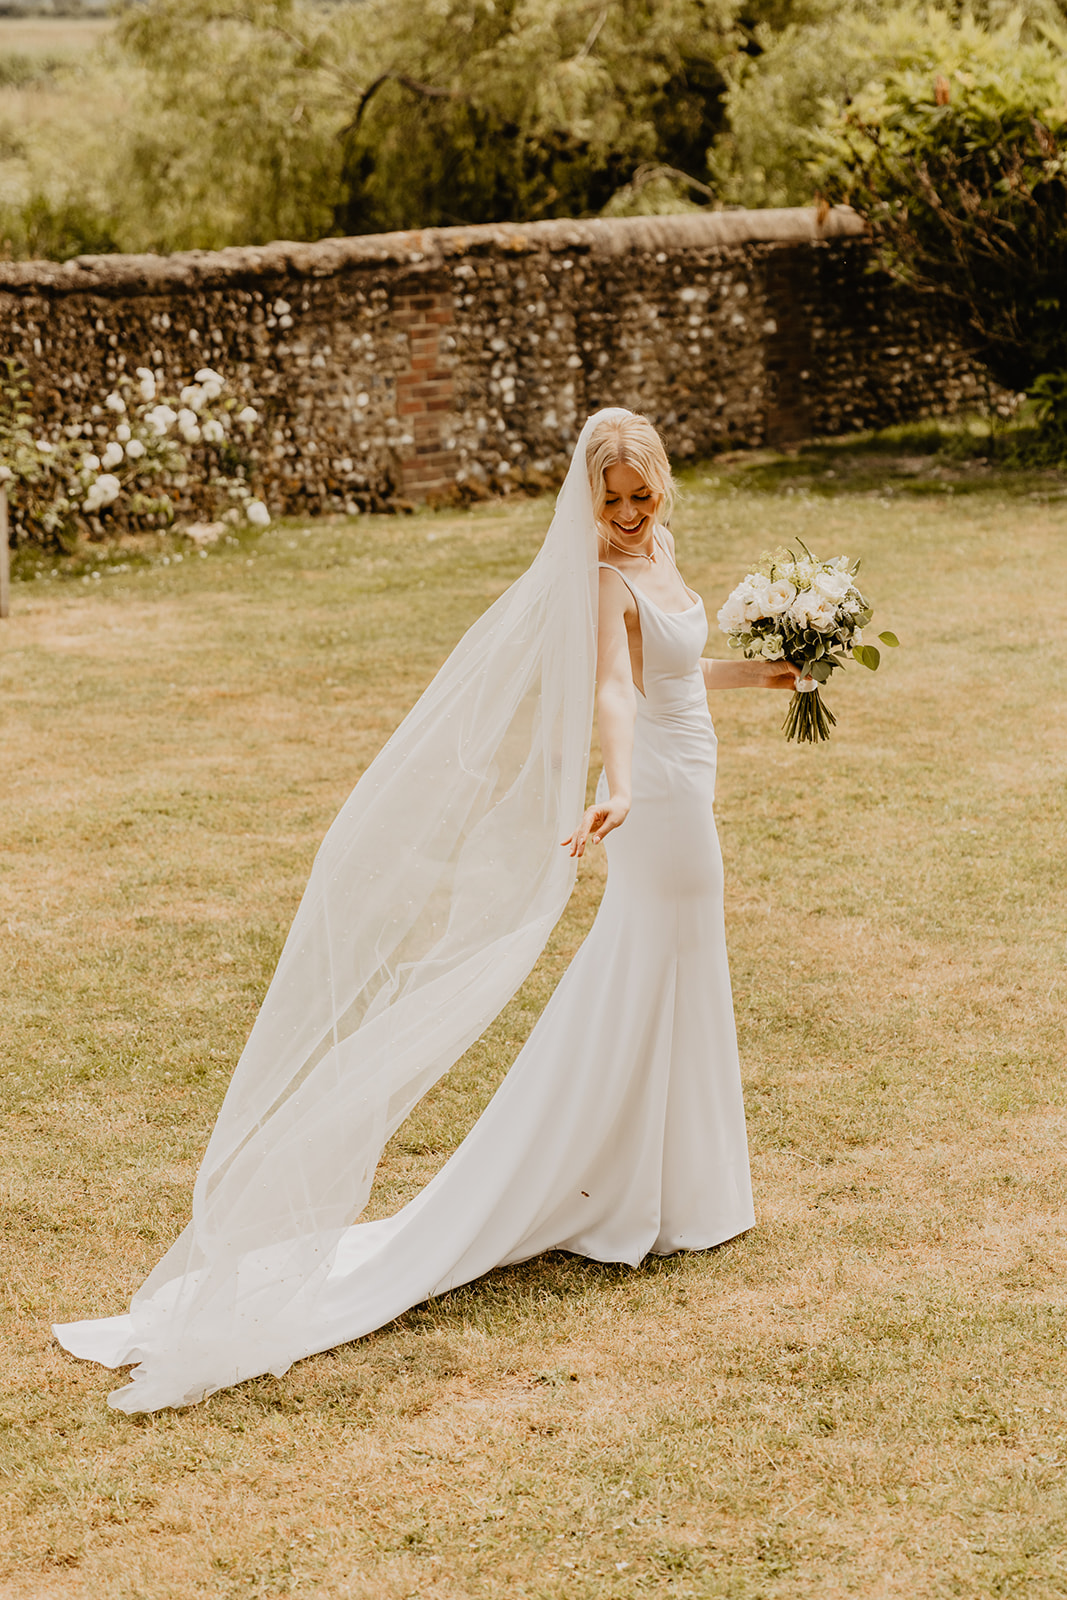 Brideat a Bury Manor Barn Wedding in Sussex. Photographer OliveJoy Photography.